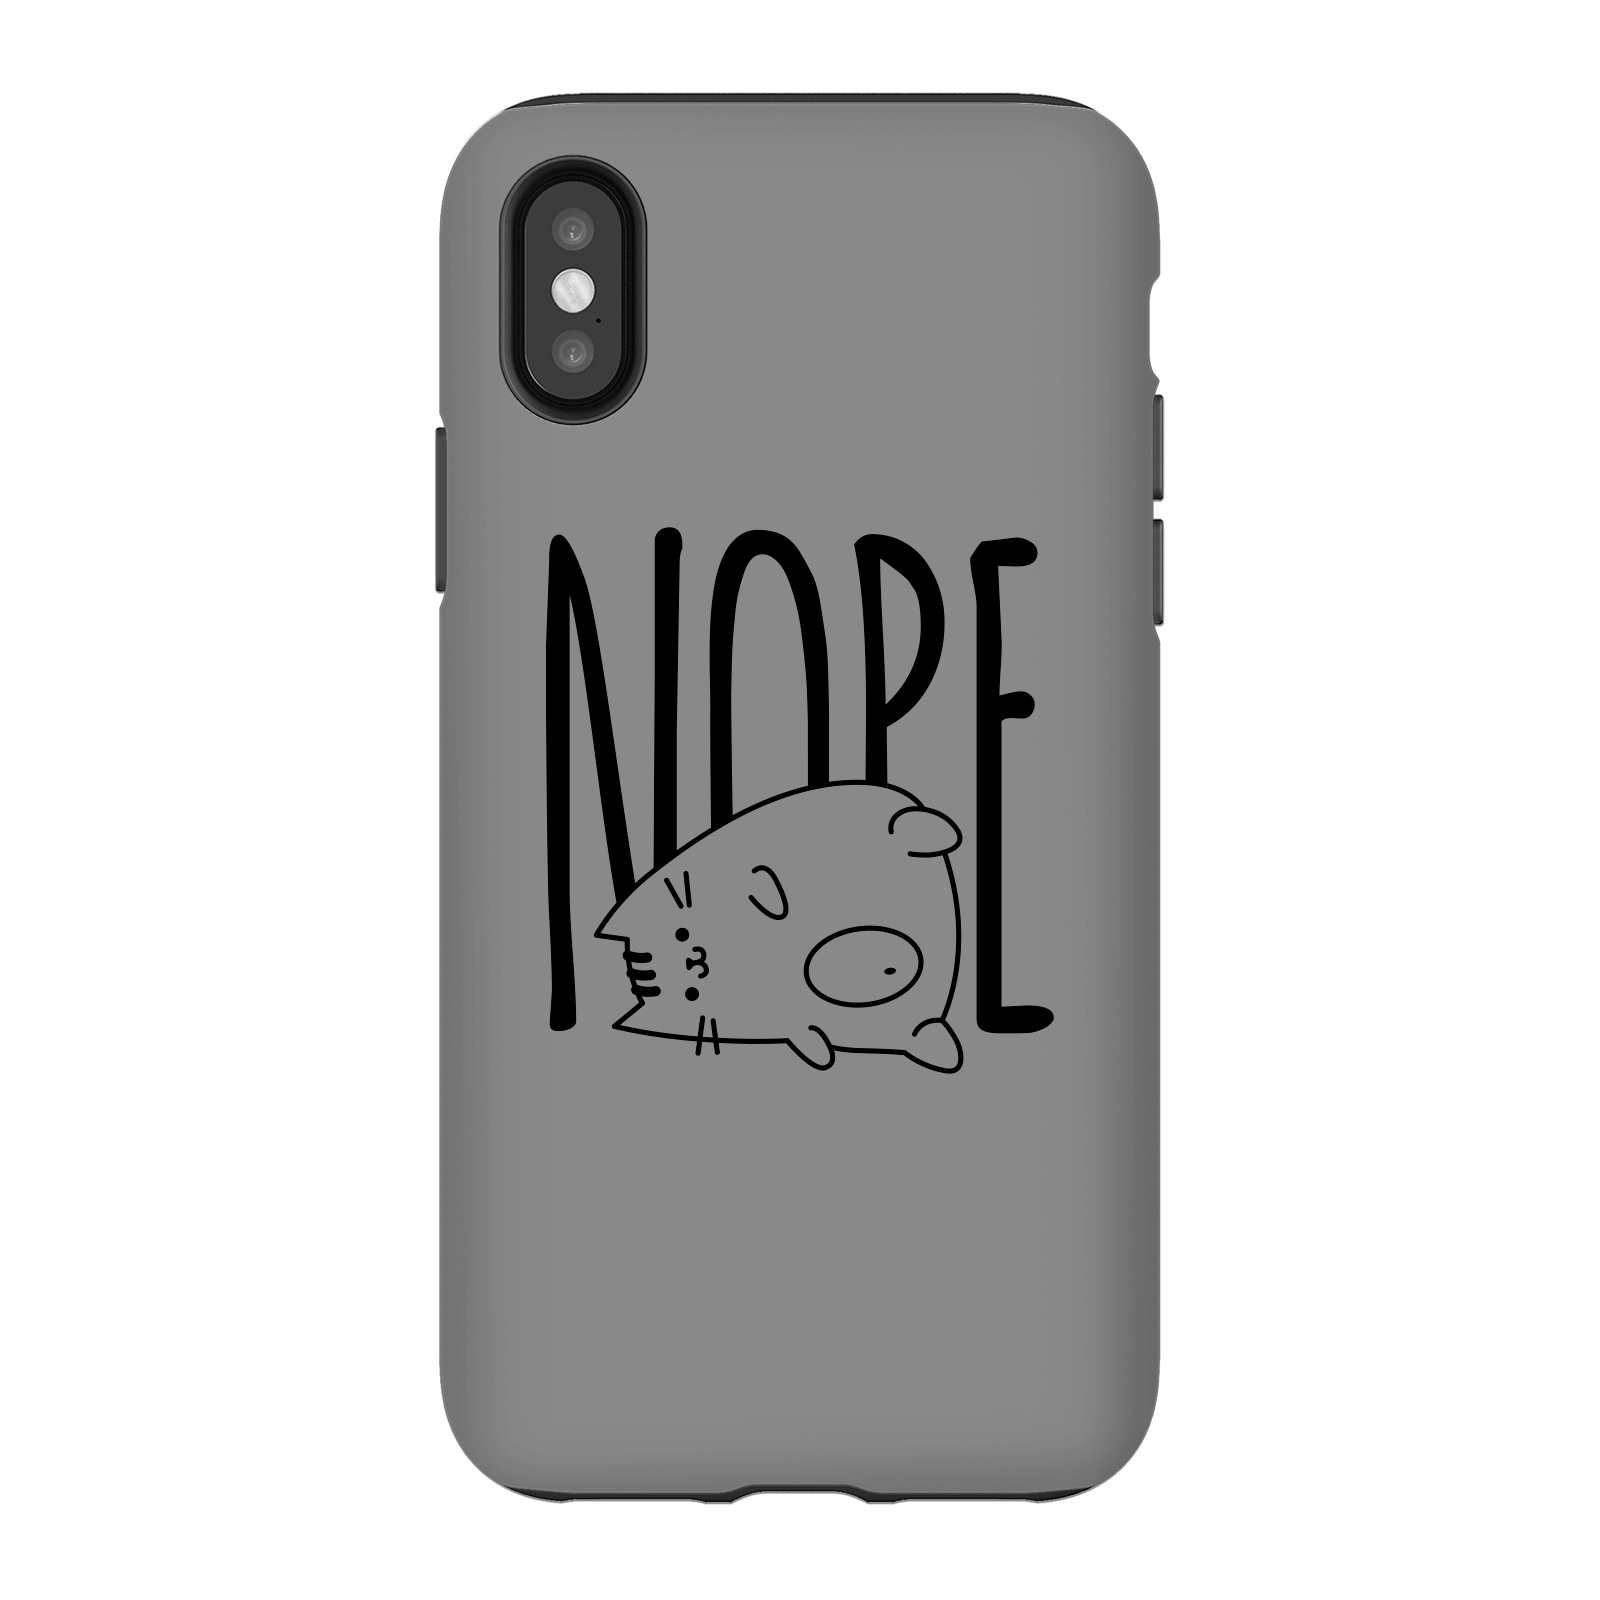 Nope Phone Case for iPhone and Android - iPhone X - Tough Case - Gloss